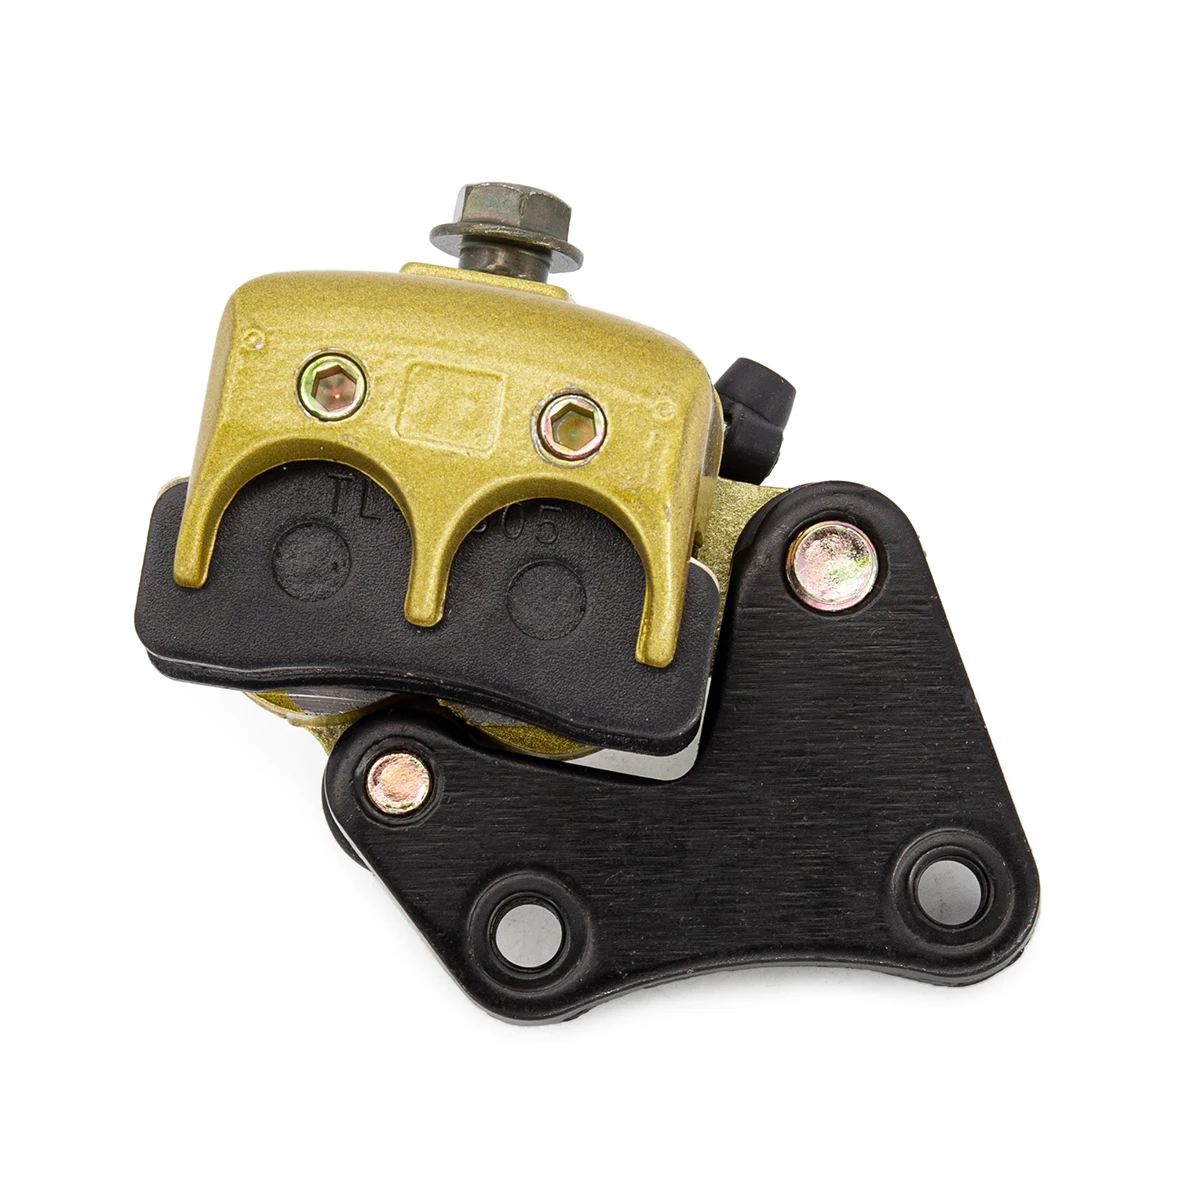 

Front Disc Hydraulic Brake Caliper for 50cc 110cc 125cc Scoote Kymco Motorcycle dirt pit bike quad ATV Moped GY6 Part